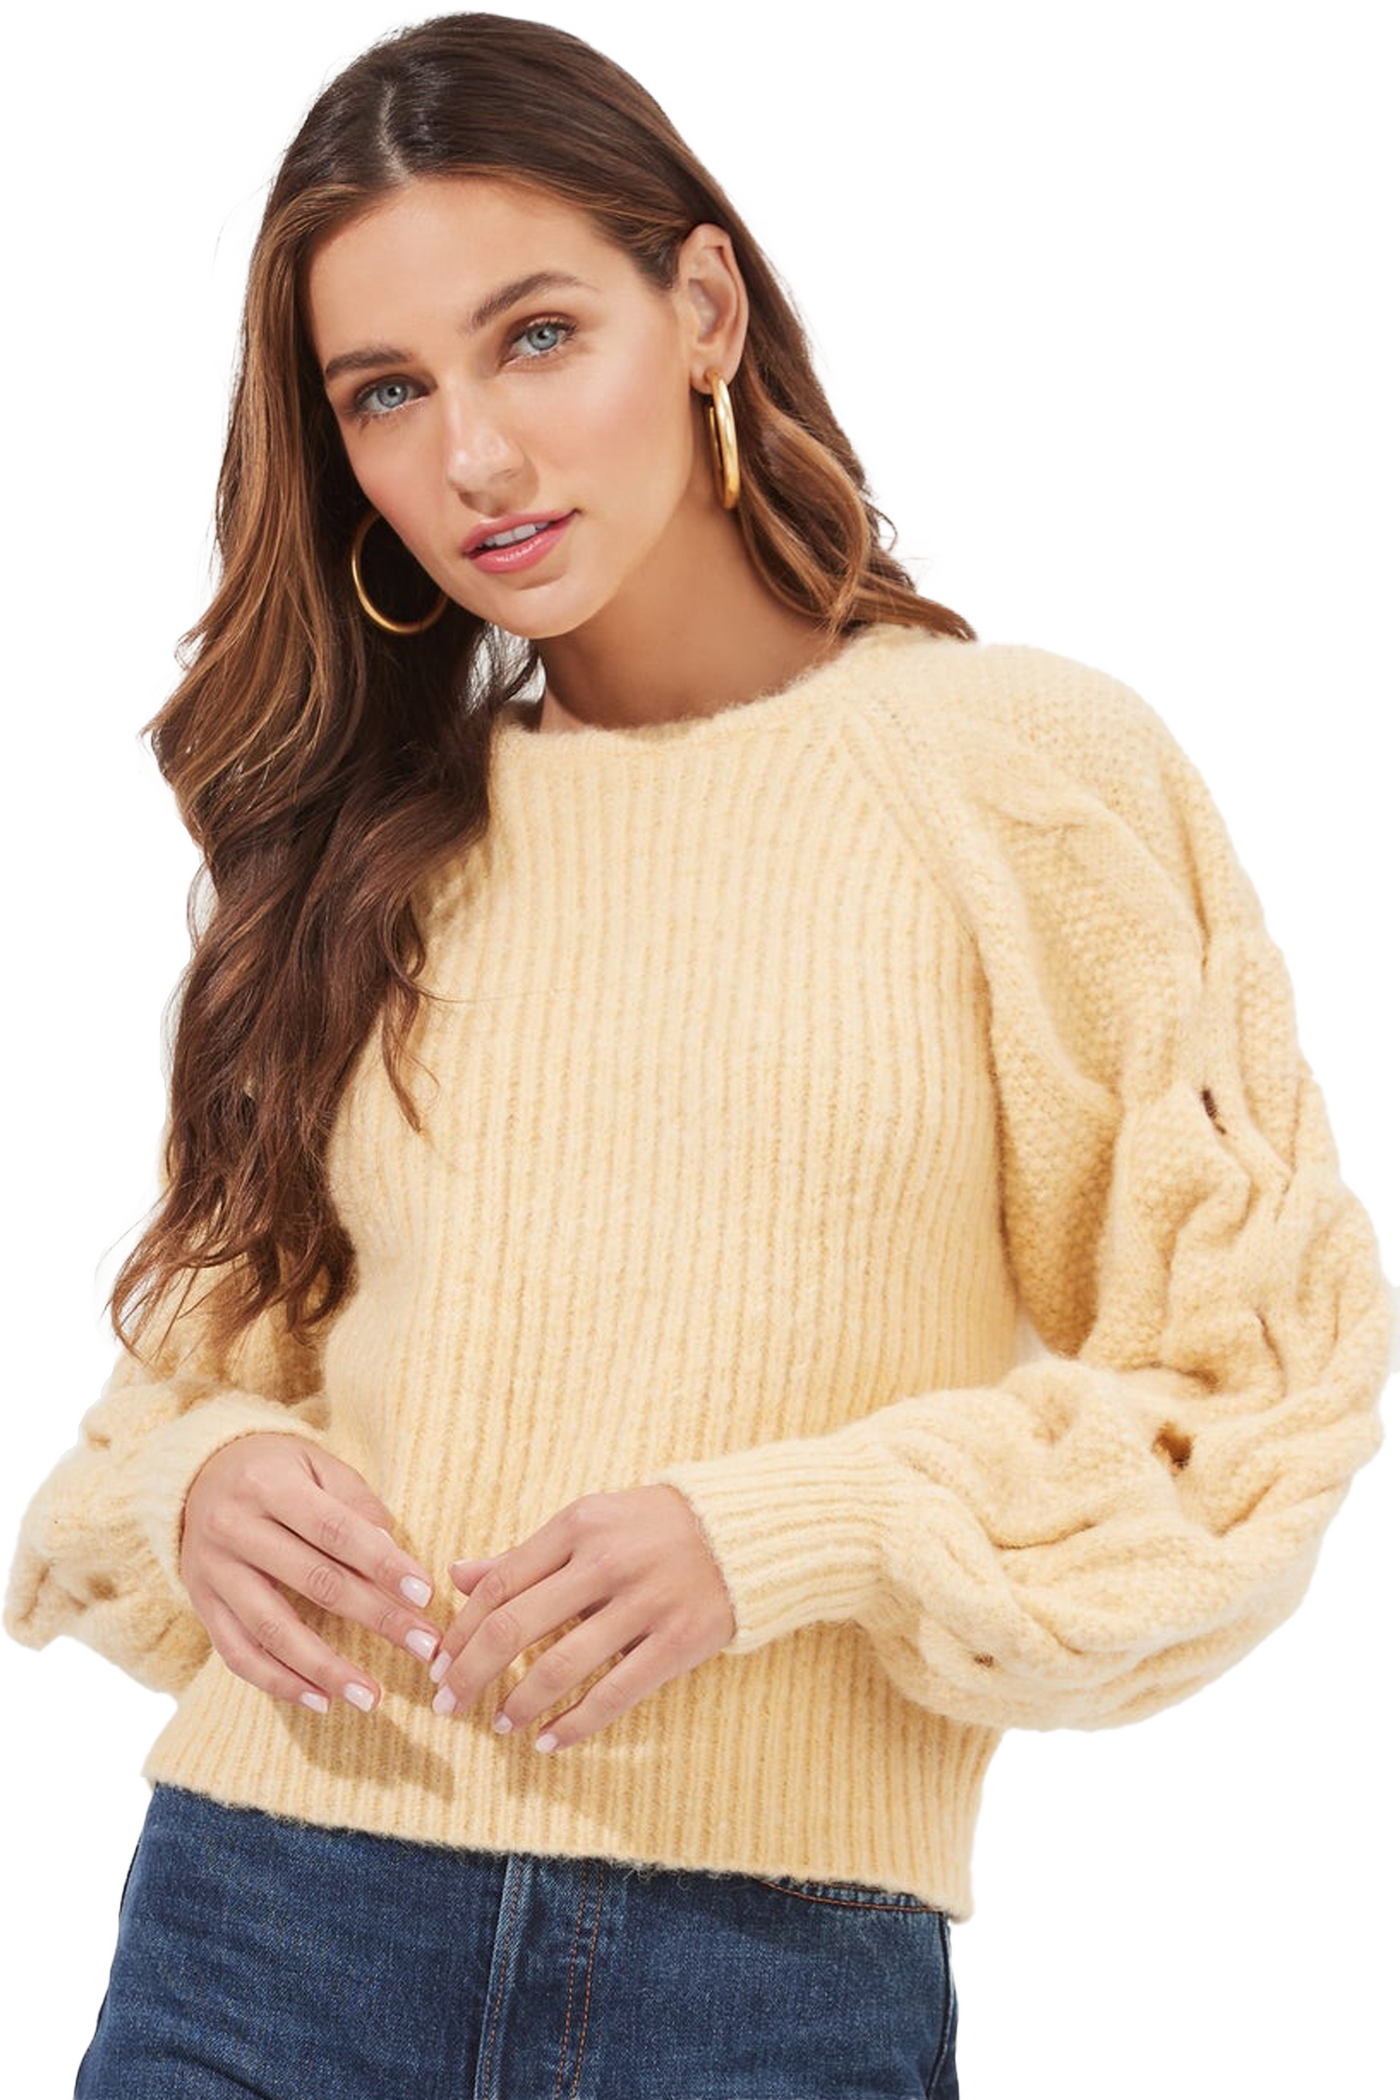 astr the label: lizette cable knit statement sleeve sweater